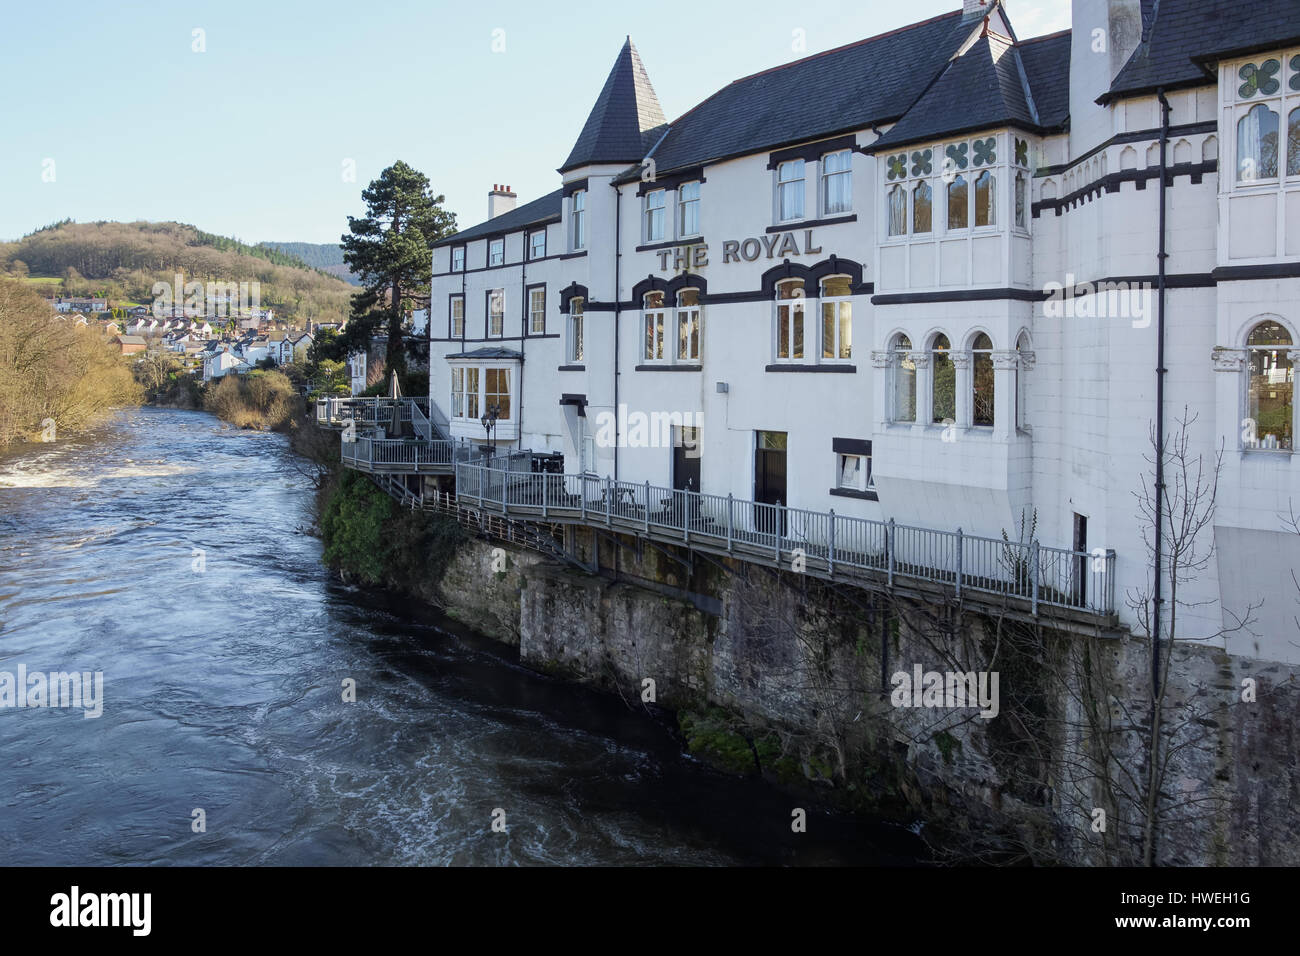 The Royal Hotel on Castle Street Llangollen overlooking the River Dee built in 1752 Stock Photo